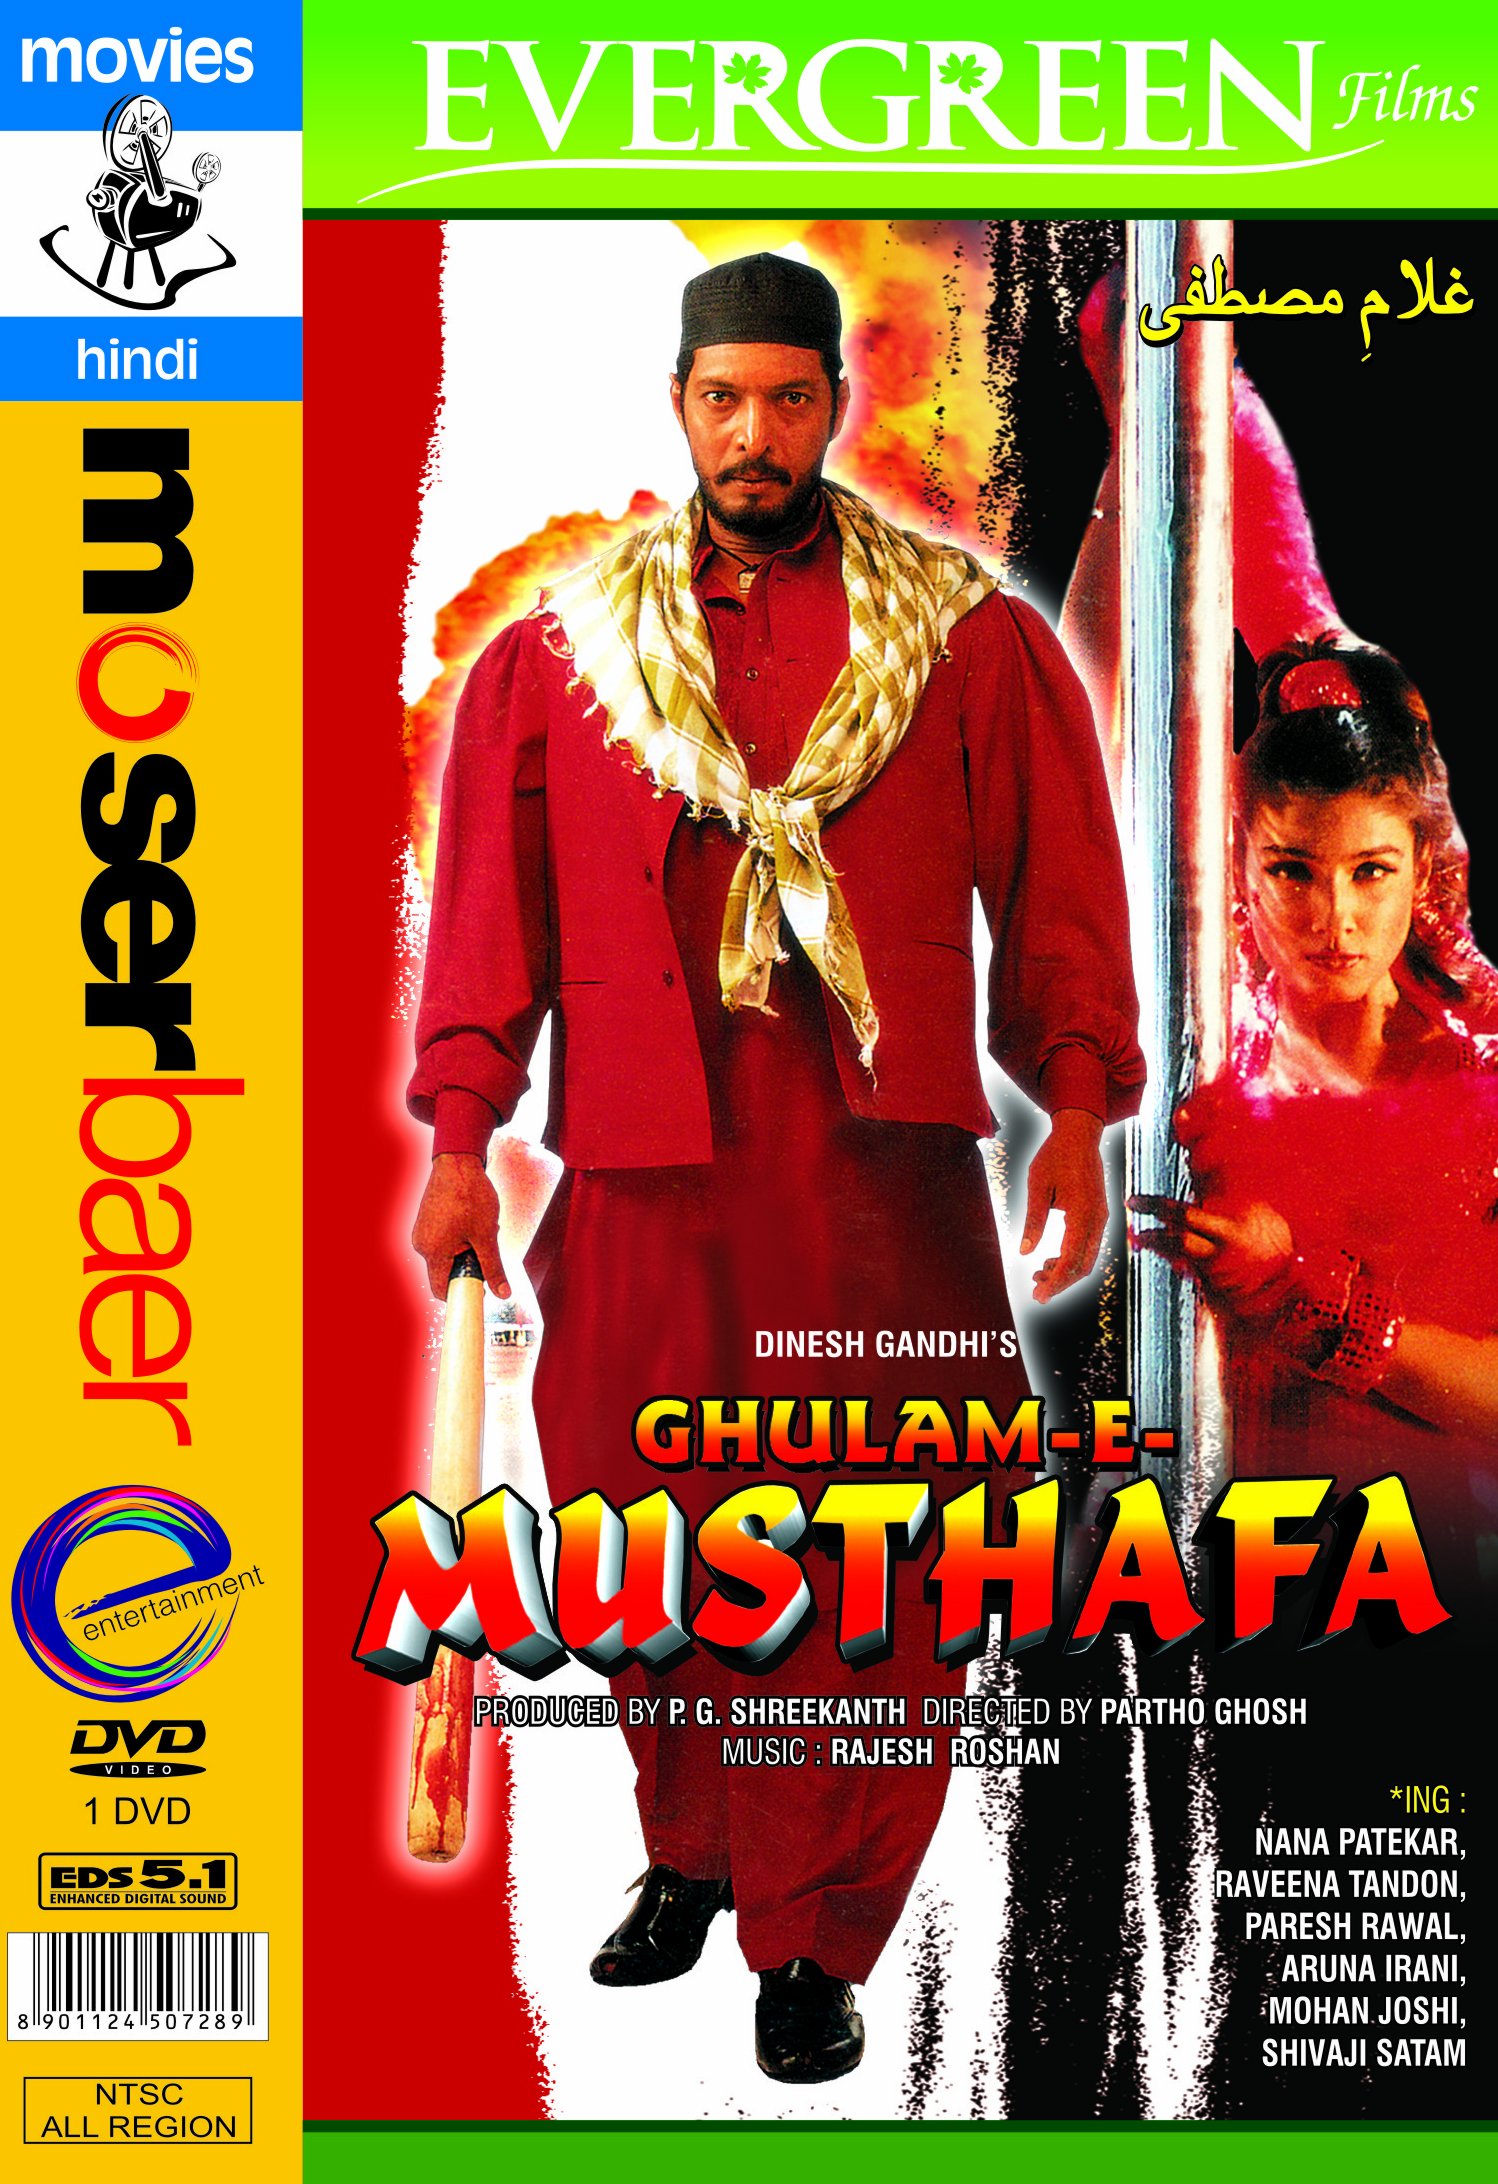 ghulam-e-mustafa-movie-purchase-or-watch-online